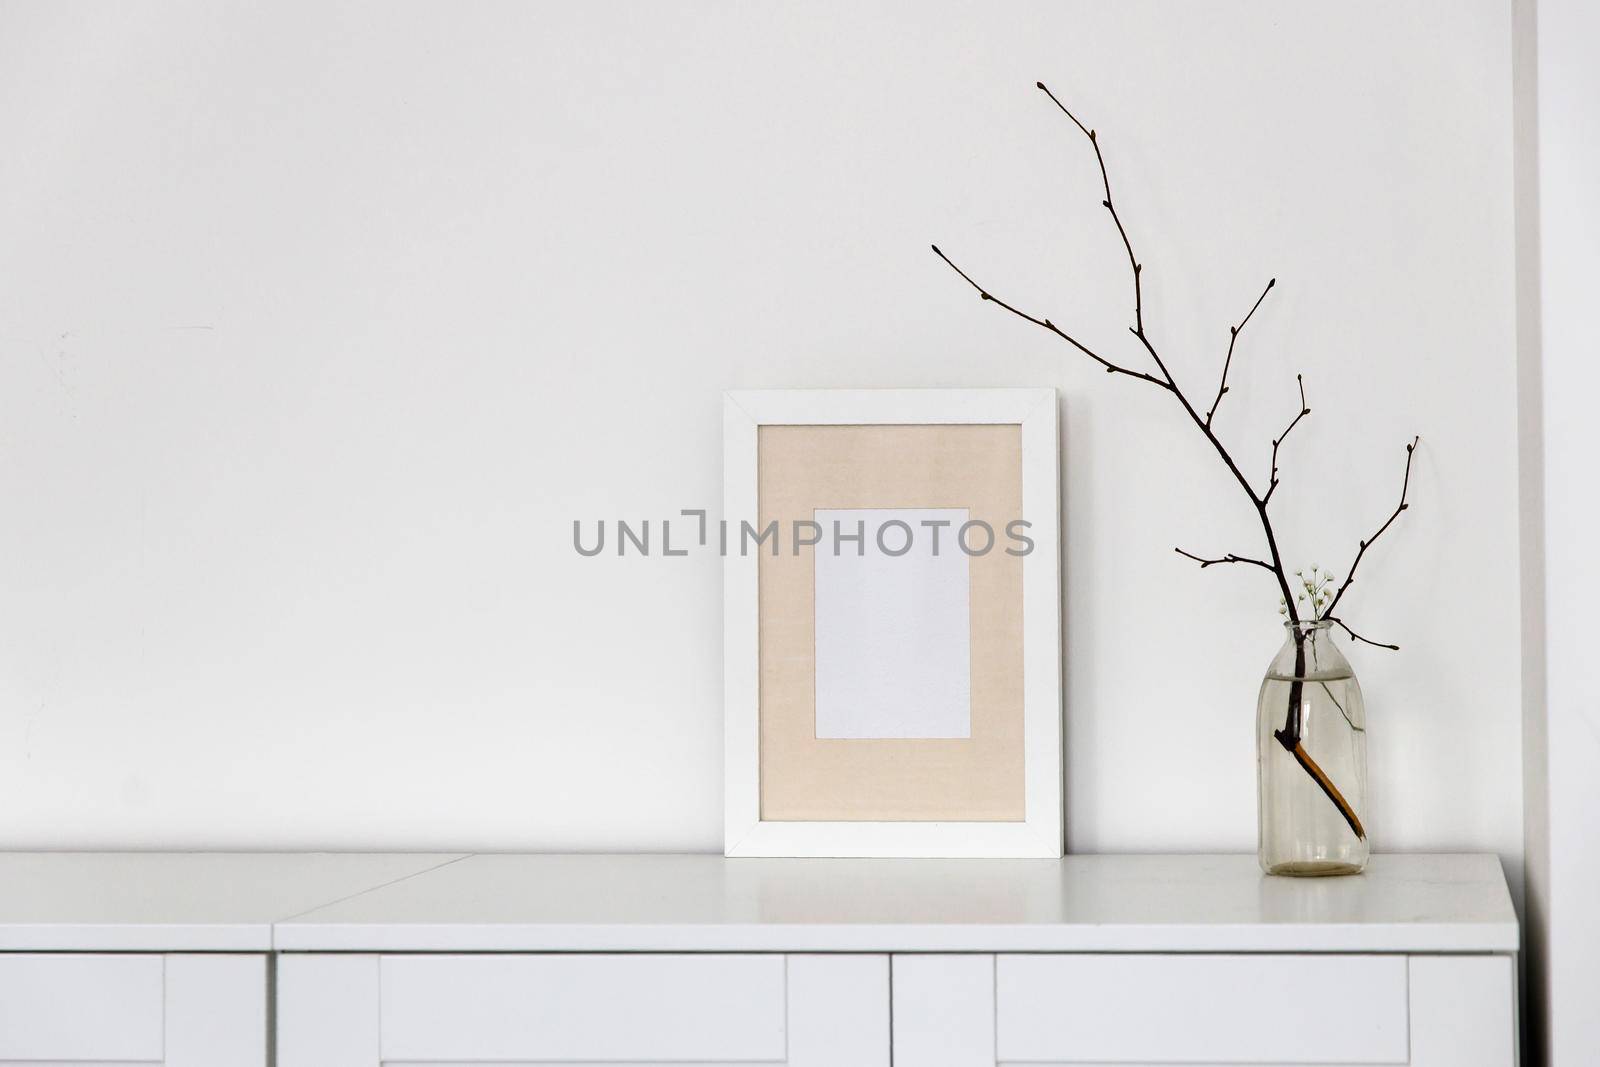 Blank canvas frame mockup. Artwork in interior design. View of modern scandinavian style interior with canvas for painting or poster on wall. Living room, commode with vases. Minimalism concept